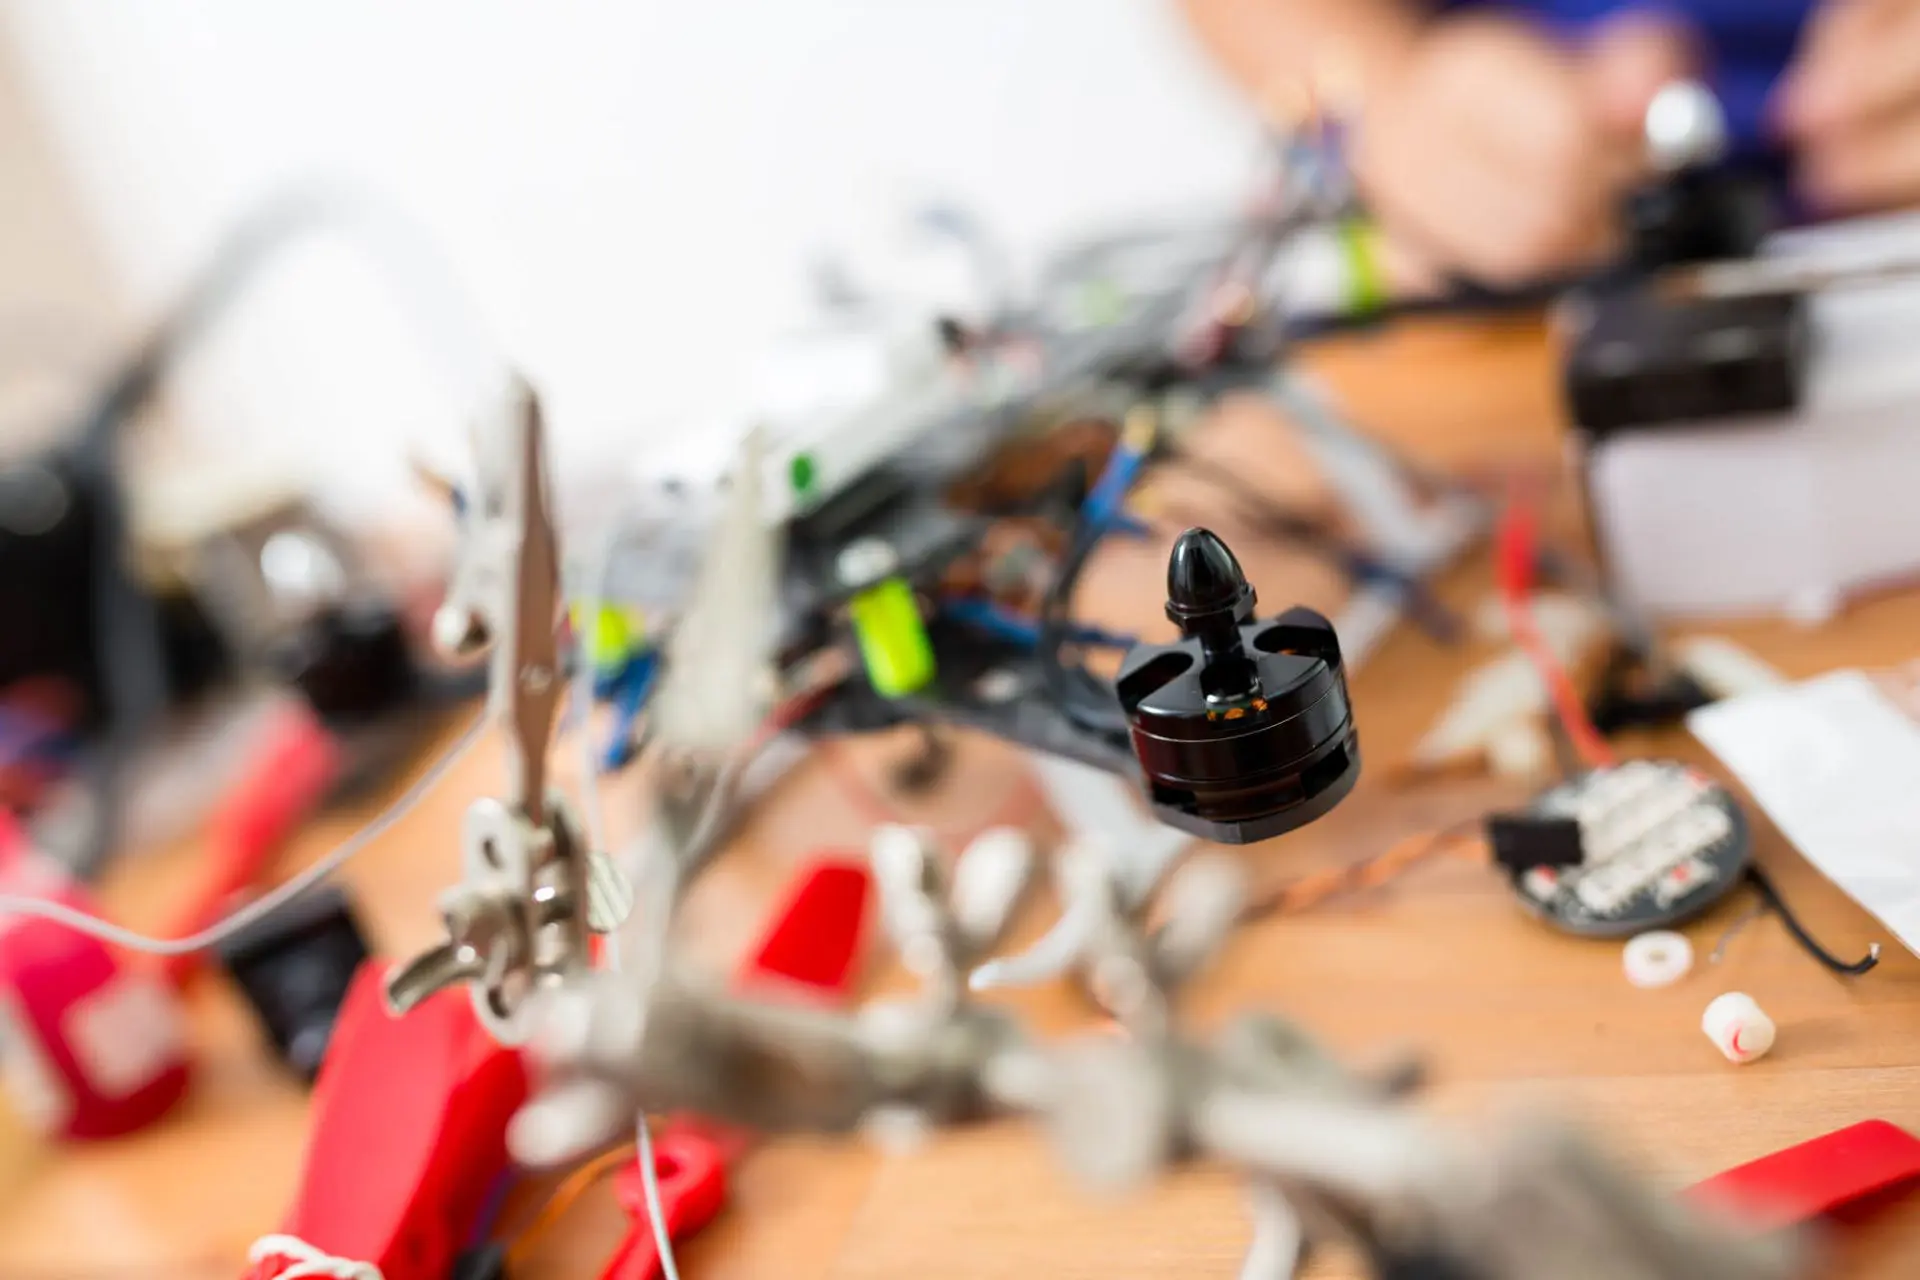 What are FPV drones and how to build your own one?